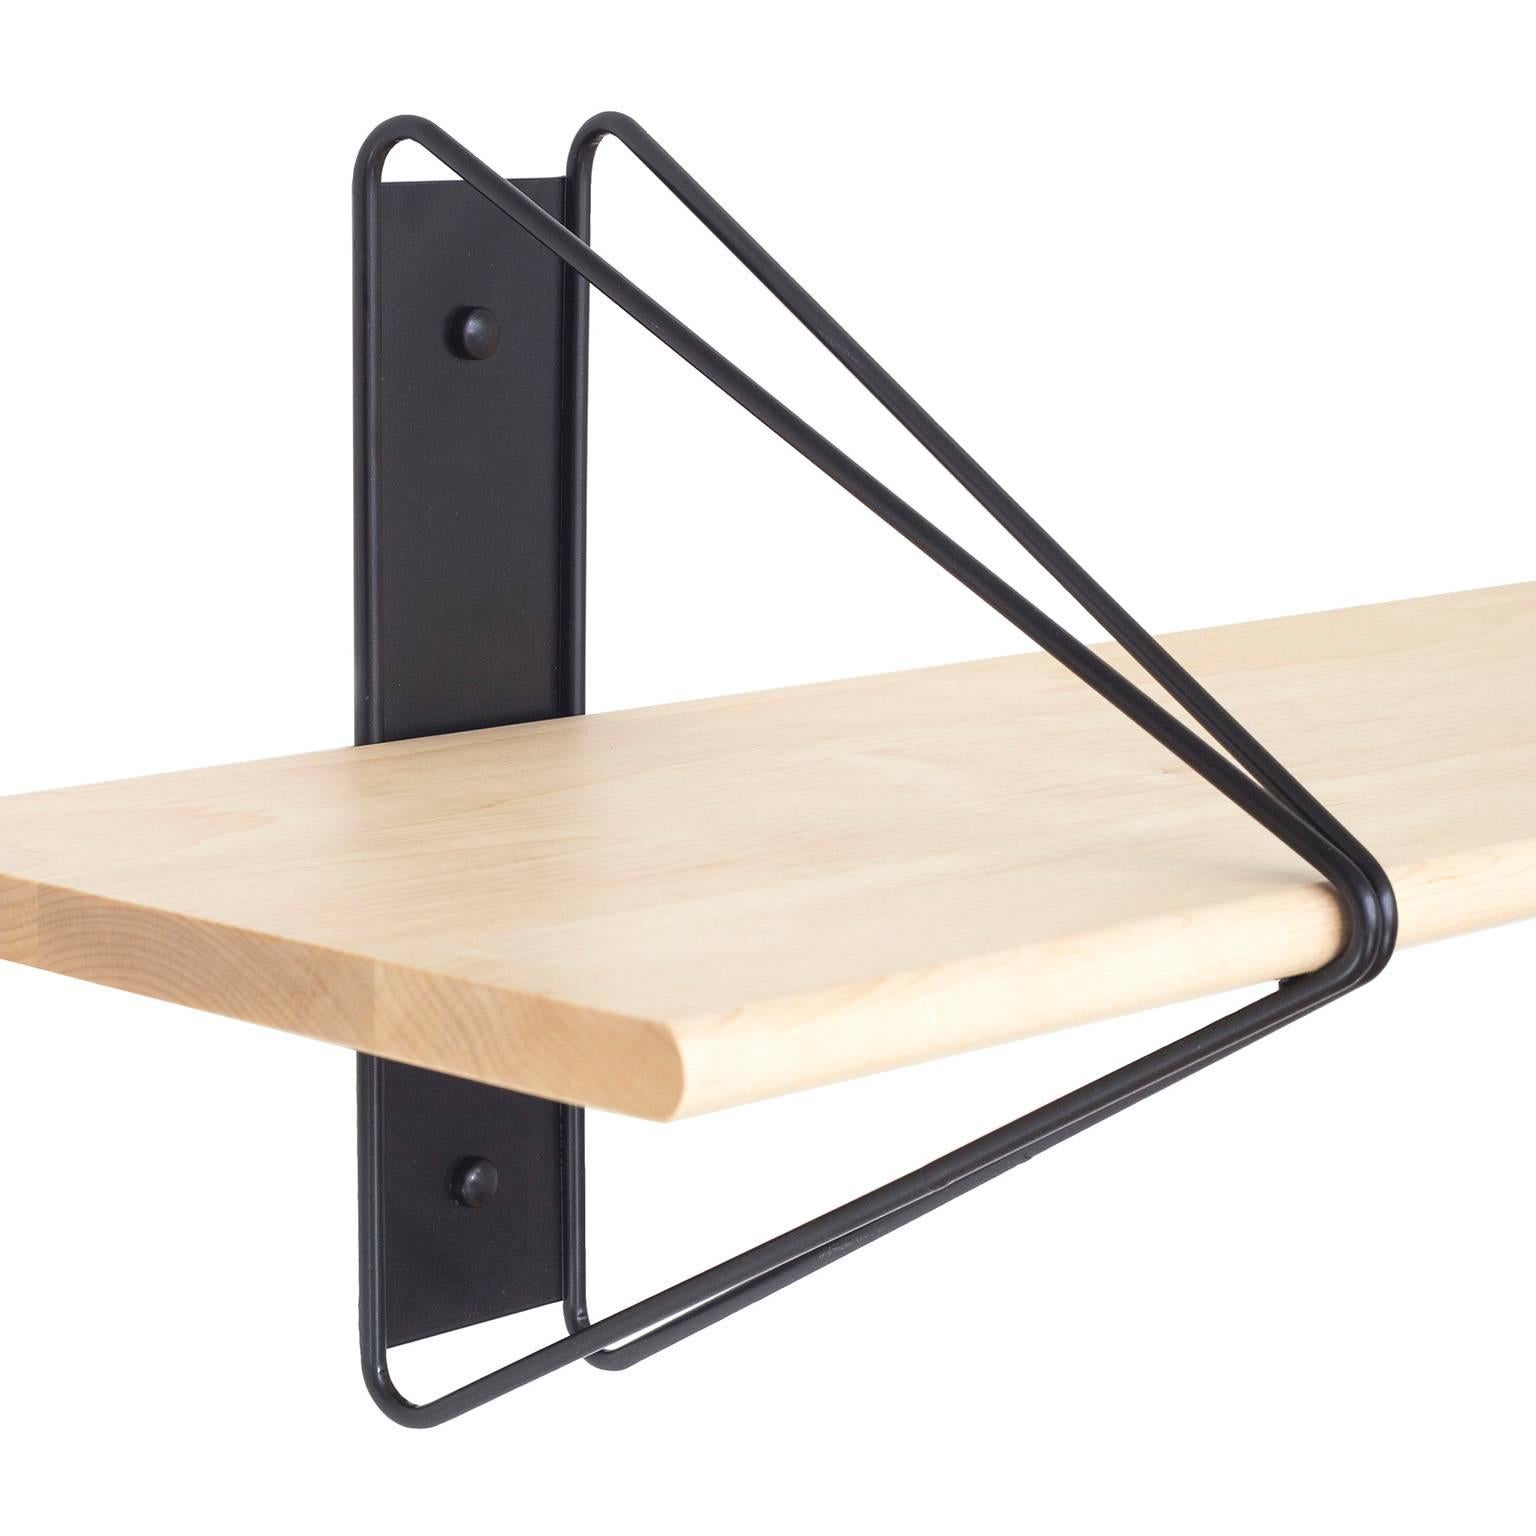 Modern Set of 2 Strut Shelves from Souda, Black and Maple, Made to Order For Sale